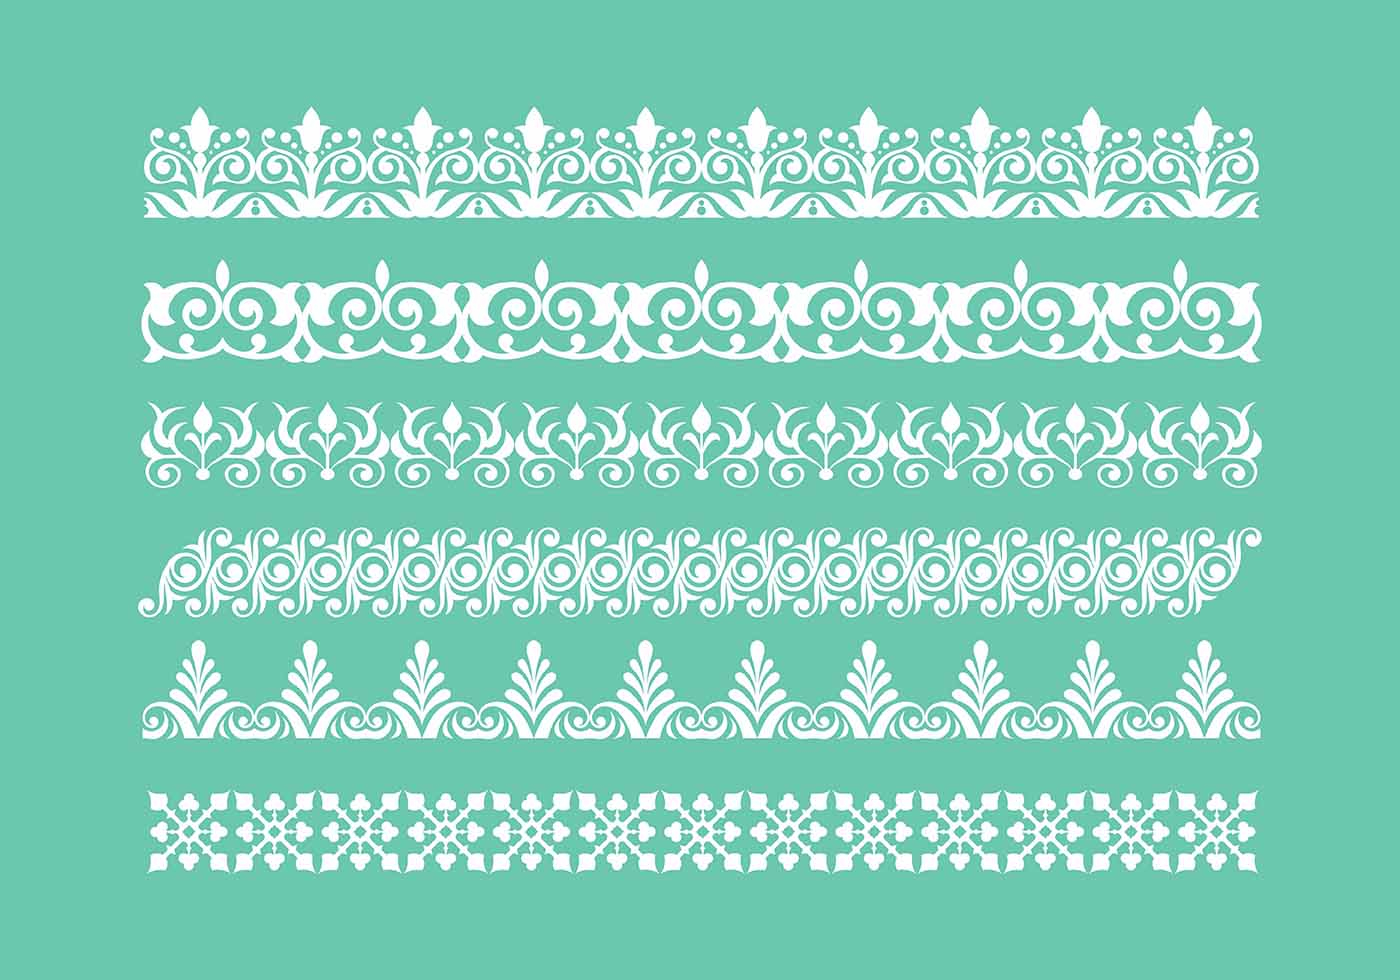 Crochet Trim Patterns Free Lace Trim Icons Vector Download Free Vector Art Stock